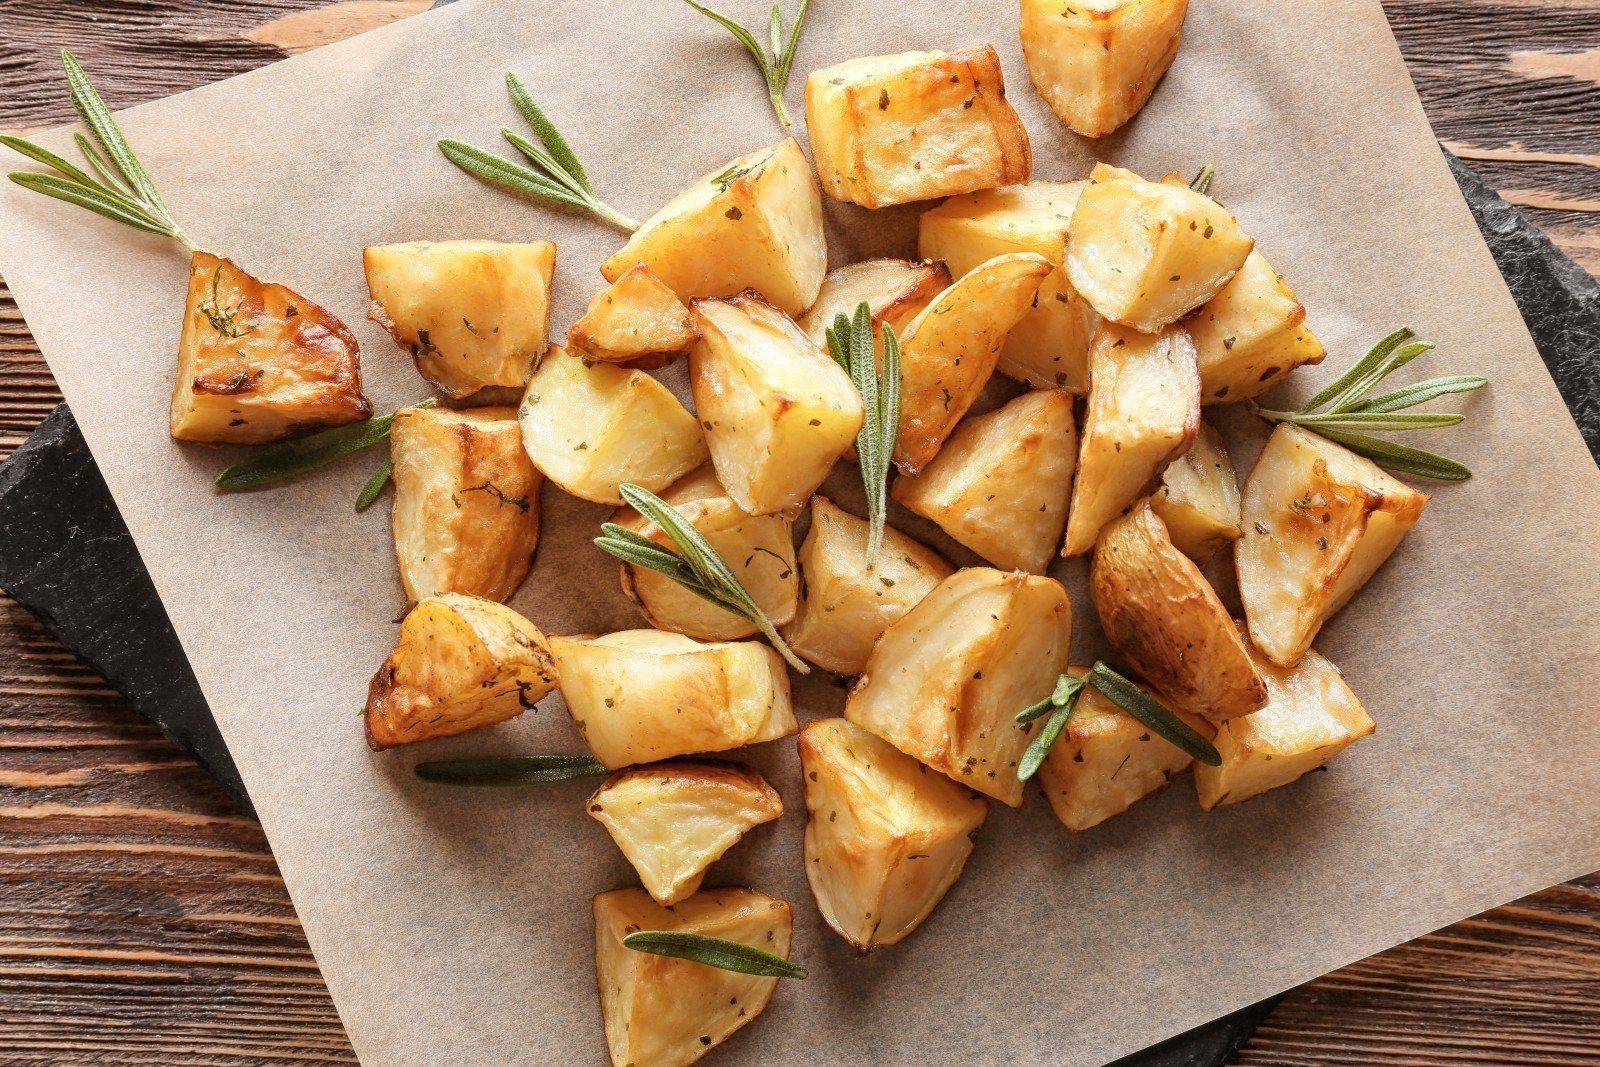 50 potato recipes for simple yet tasty dishes